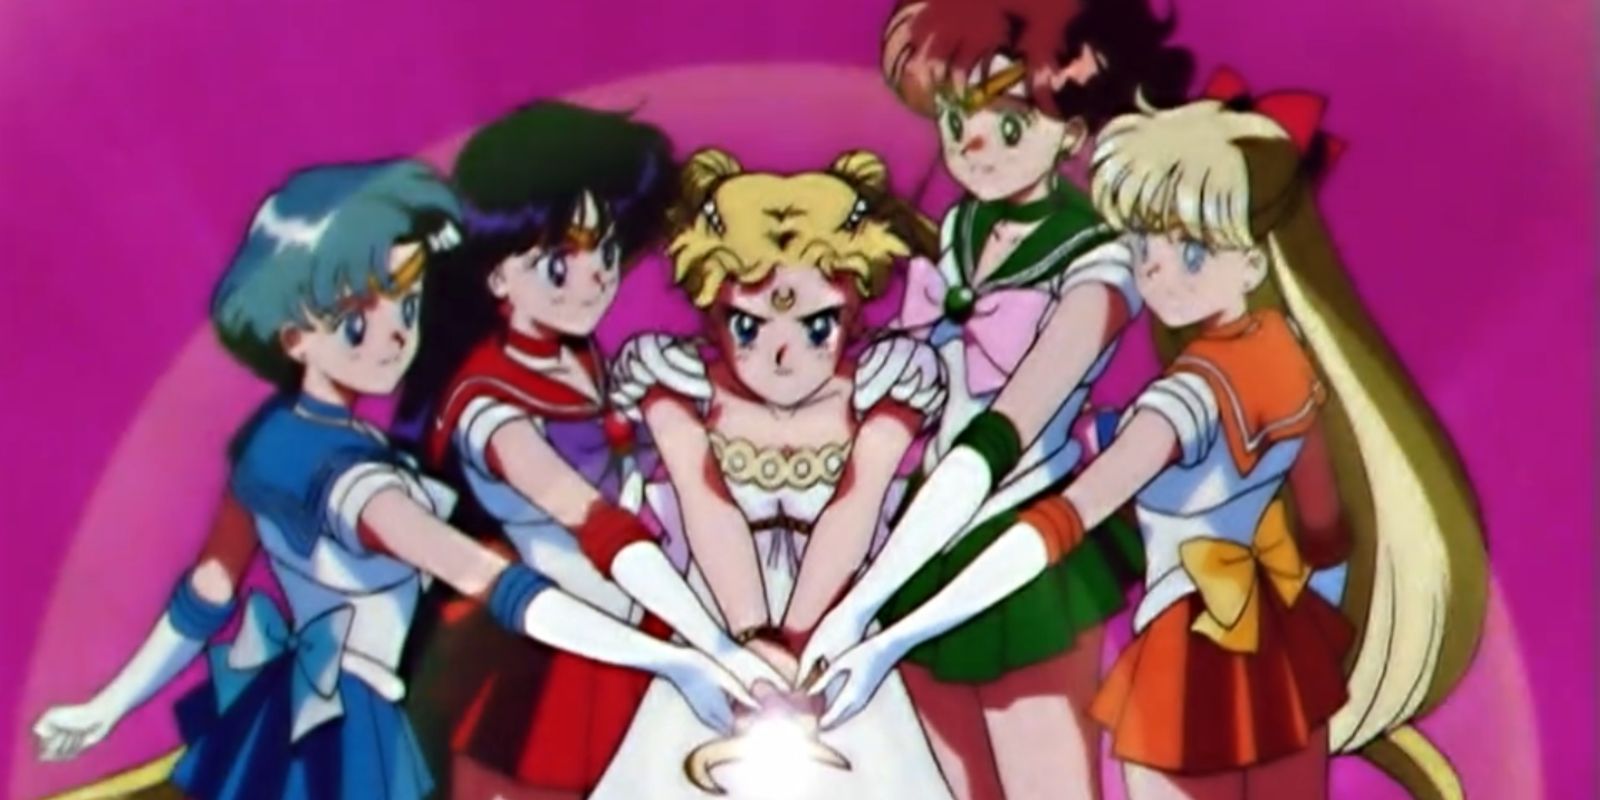 Princess-Serenity-and-the-Sailor-Scouts-holding-Sailor-Moon's-wand-to-instill-power